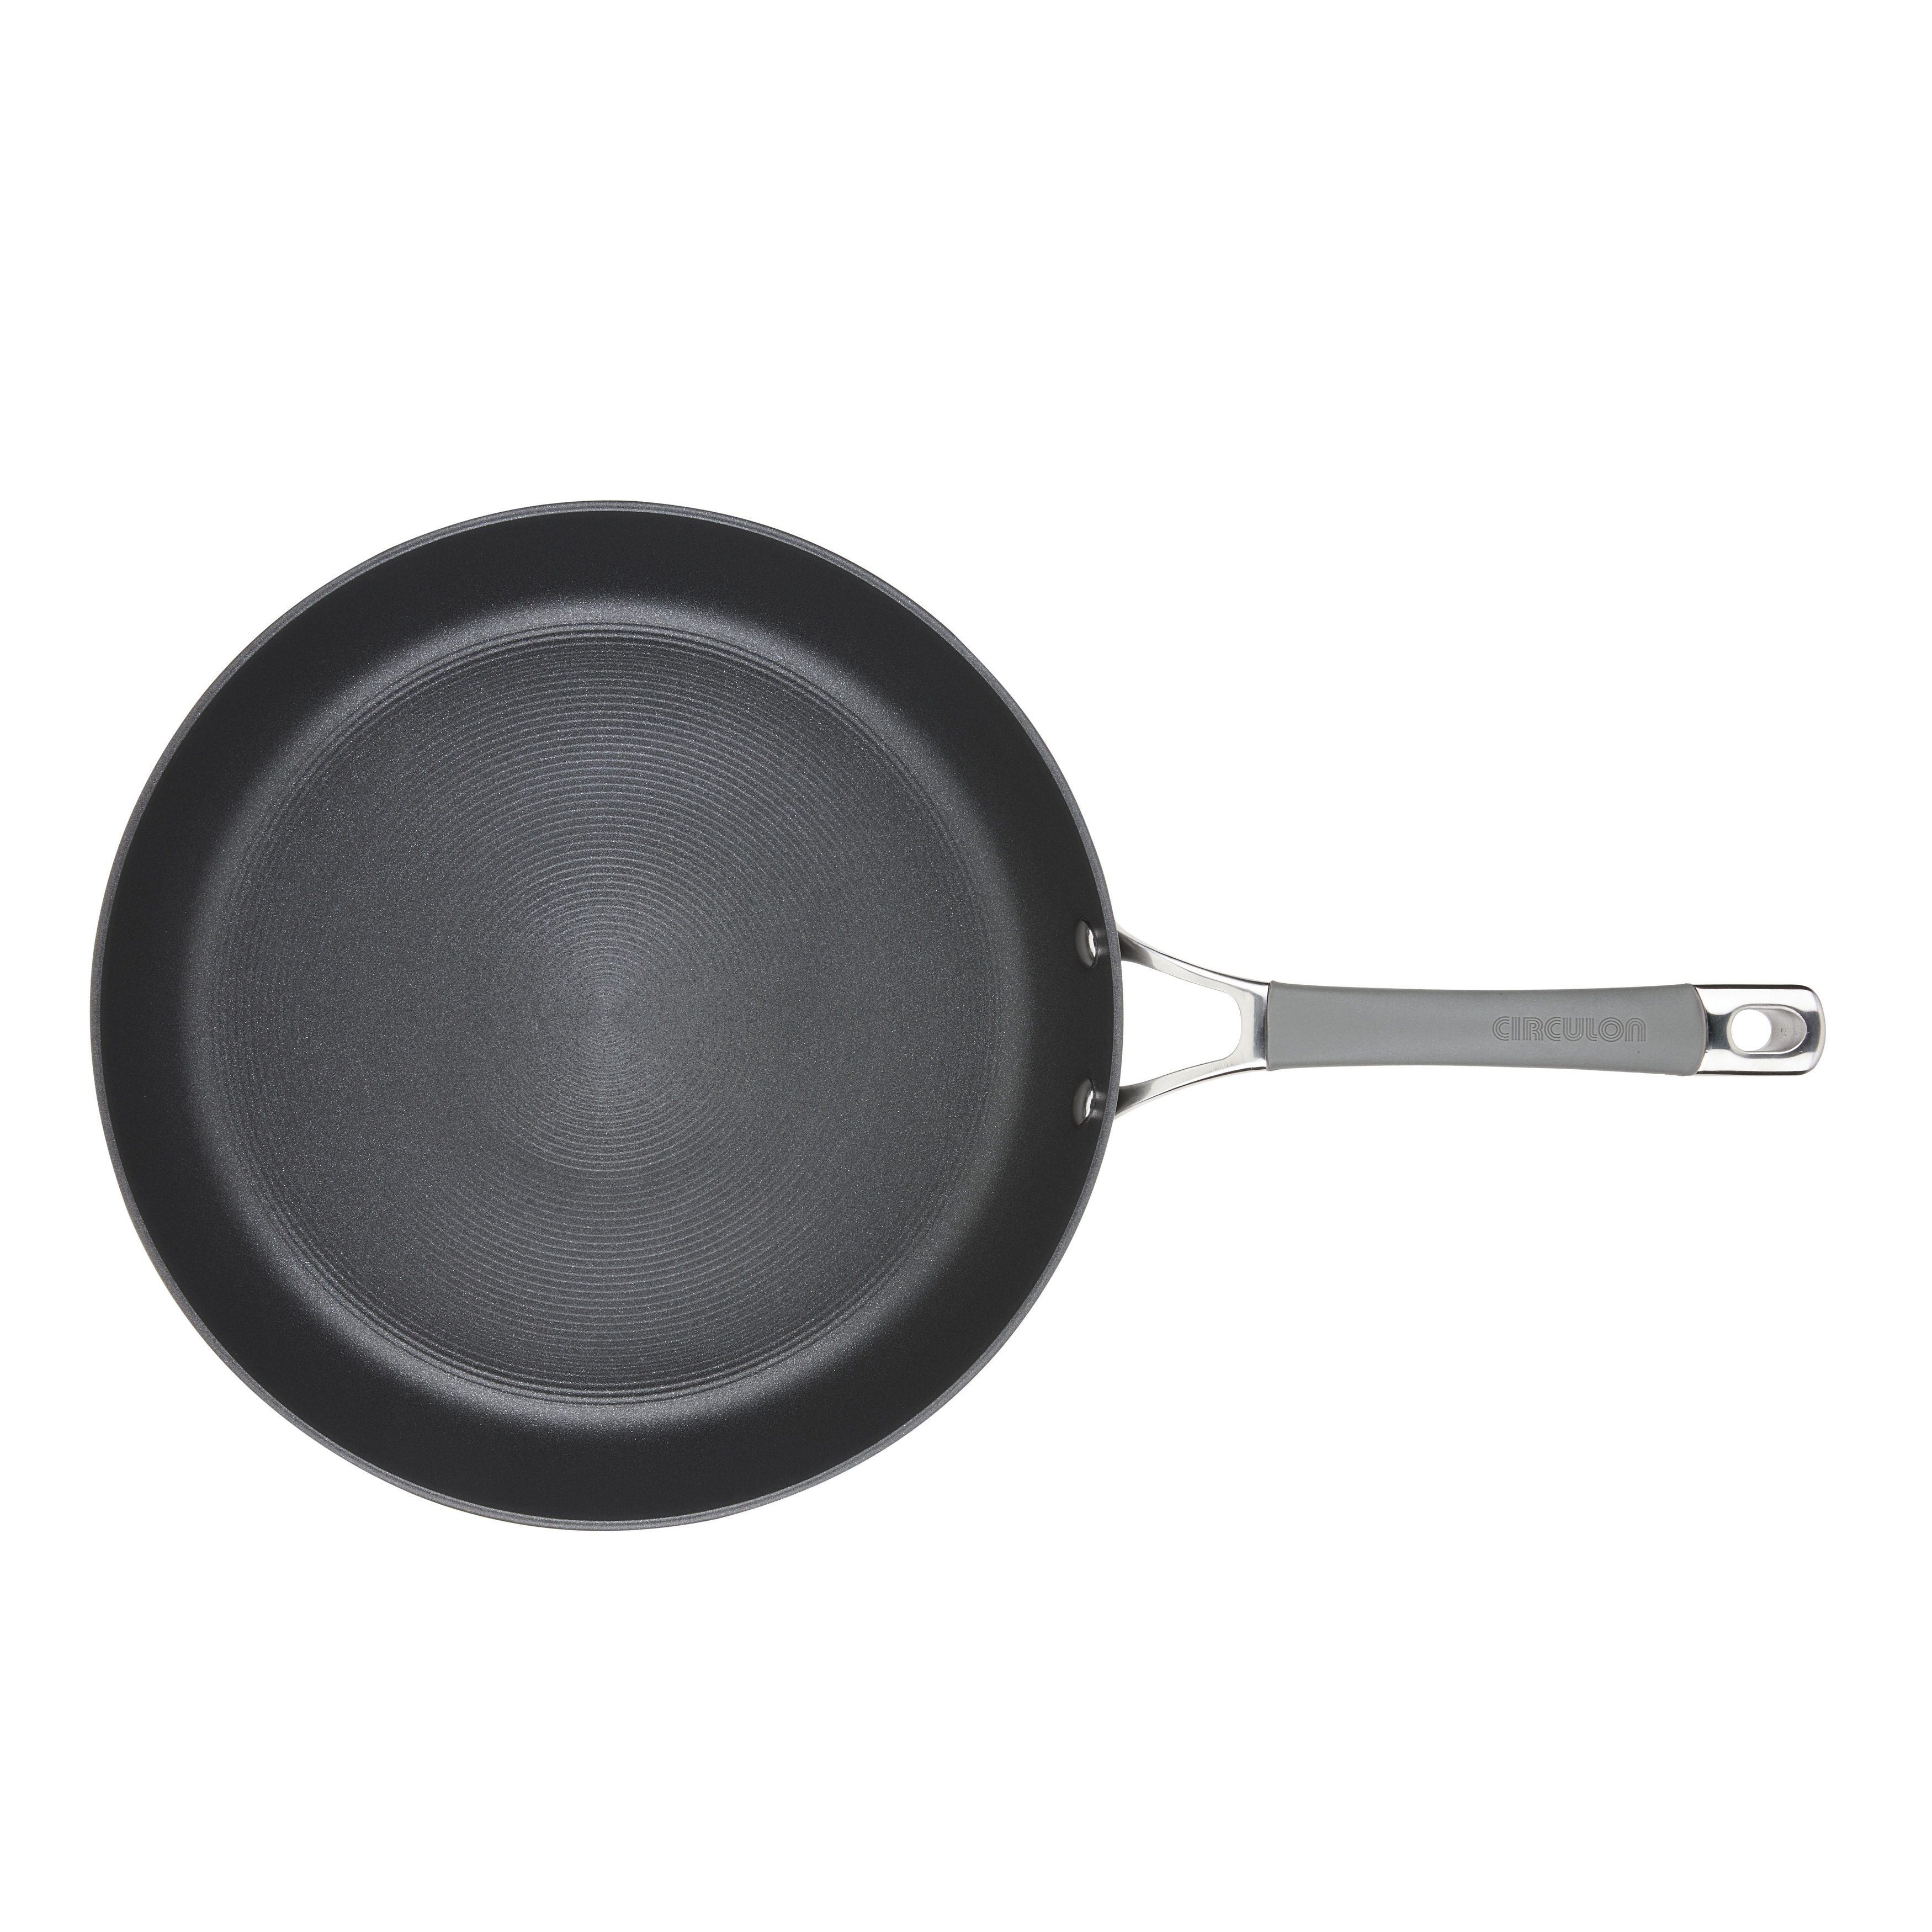 https://ak1.ostkcdn.com/images/products/is/images/direct/034f7d6bac2429e34fae050b0ad6155e0168d73f/Circulon-Elementum-Hard-Anodized-Nonstick-Deep-Frying-Pan-with-Lid%2C-12-Inch%2C-Gray.jpg